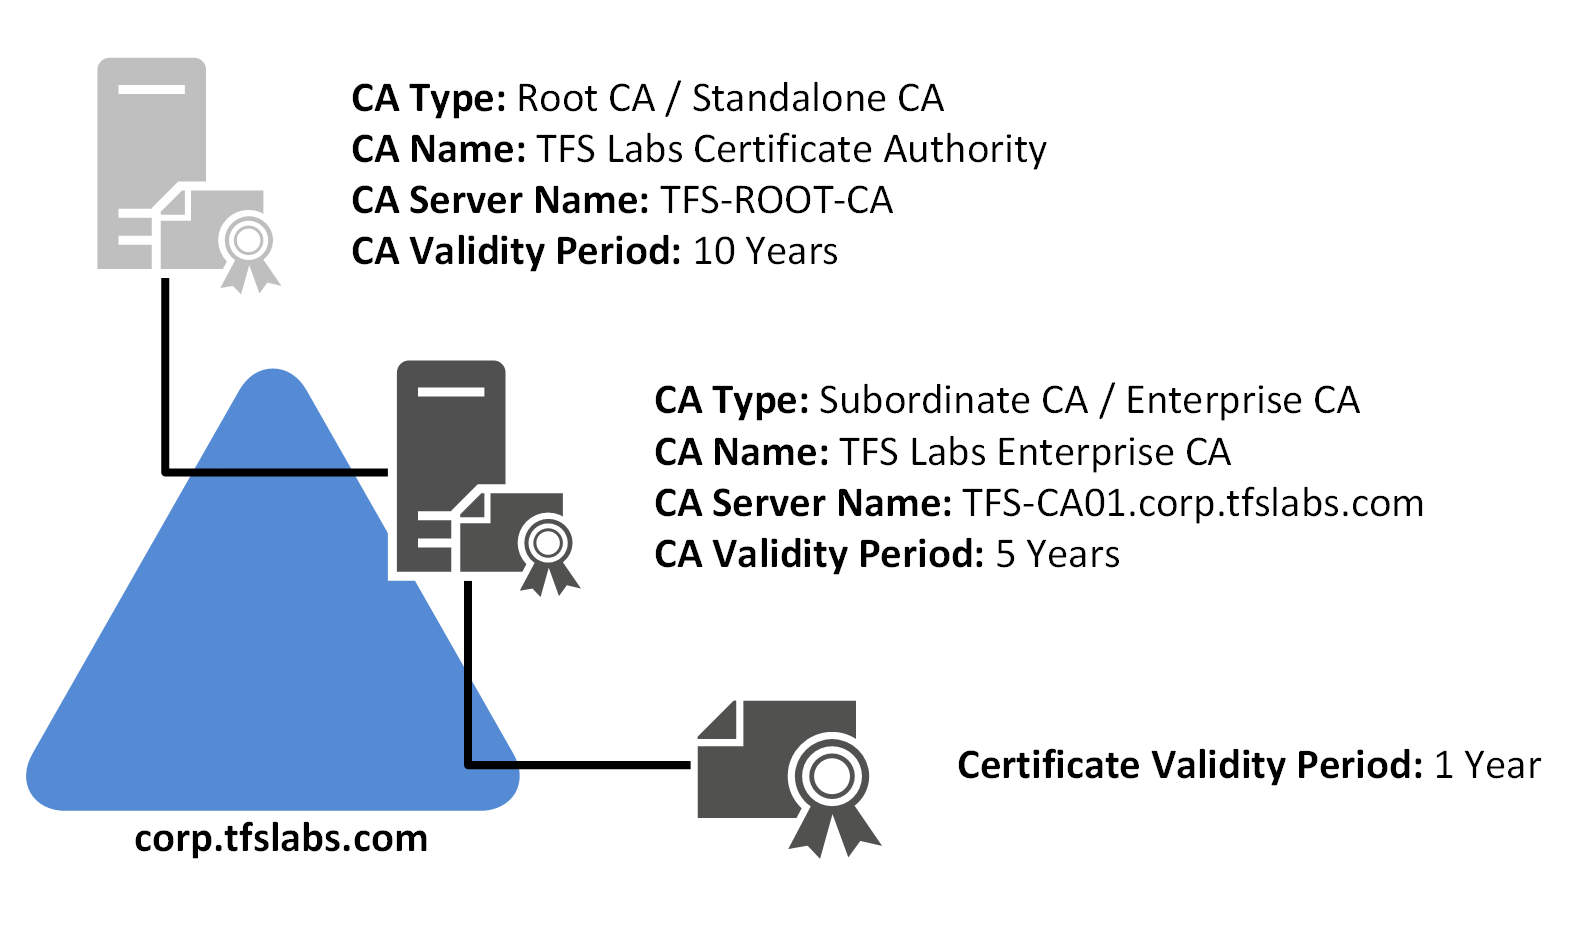 TFS Labs Certificate Authority Hierarchy